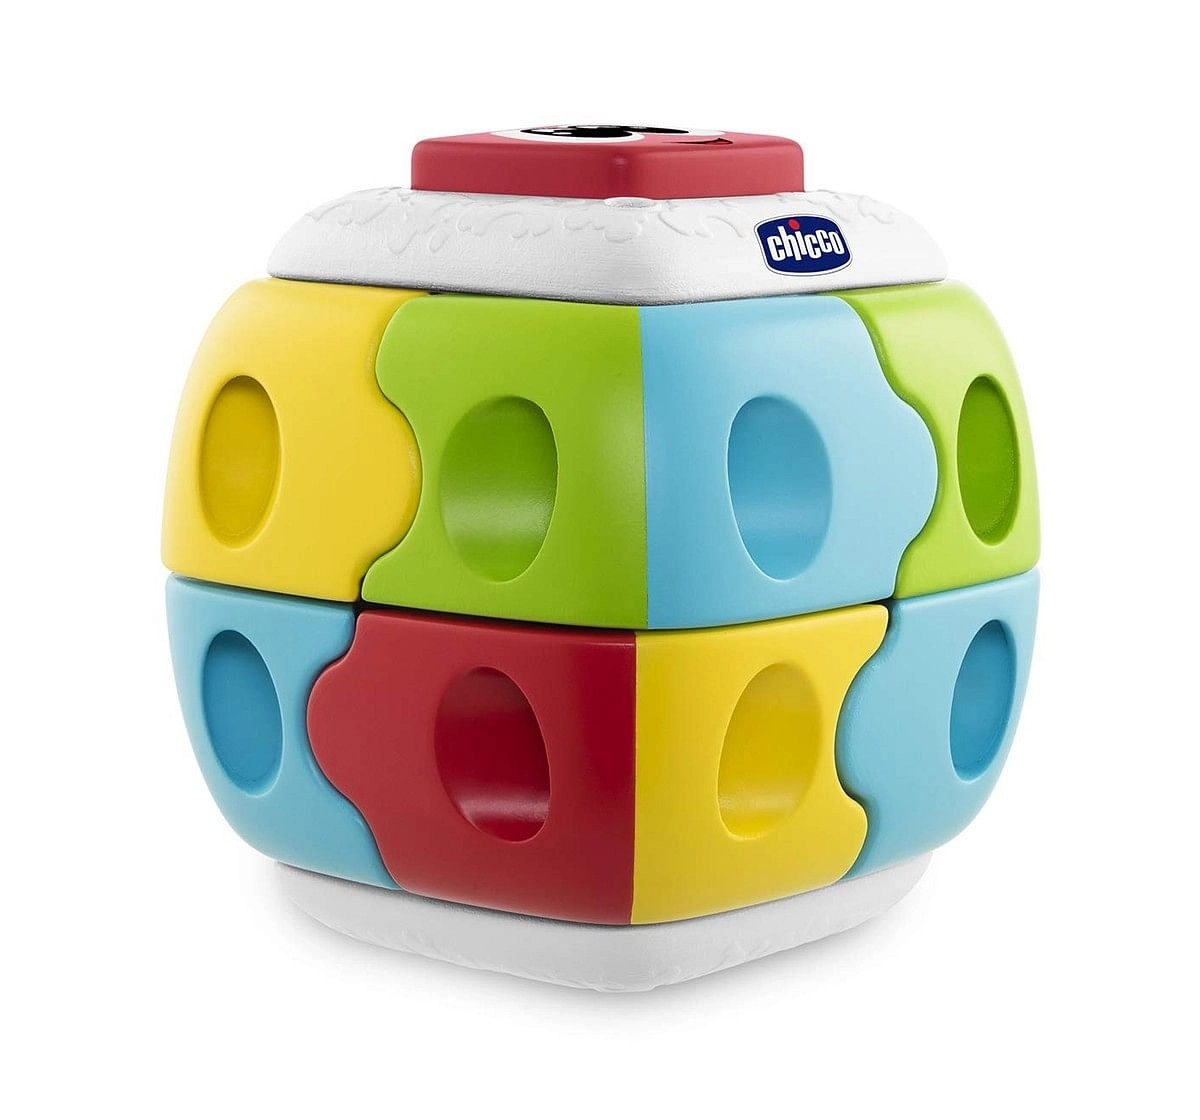 Chicco 2 IN 1 Q-Bricks Puzzle Toy for Kids age 18M + 